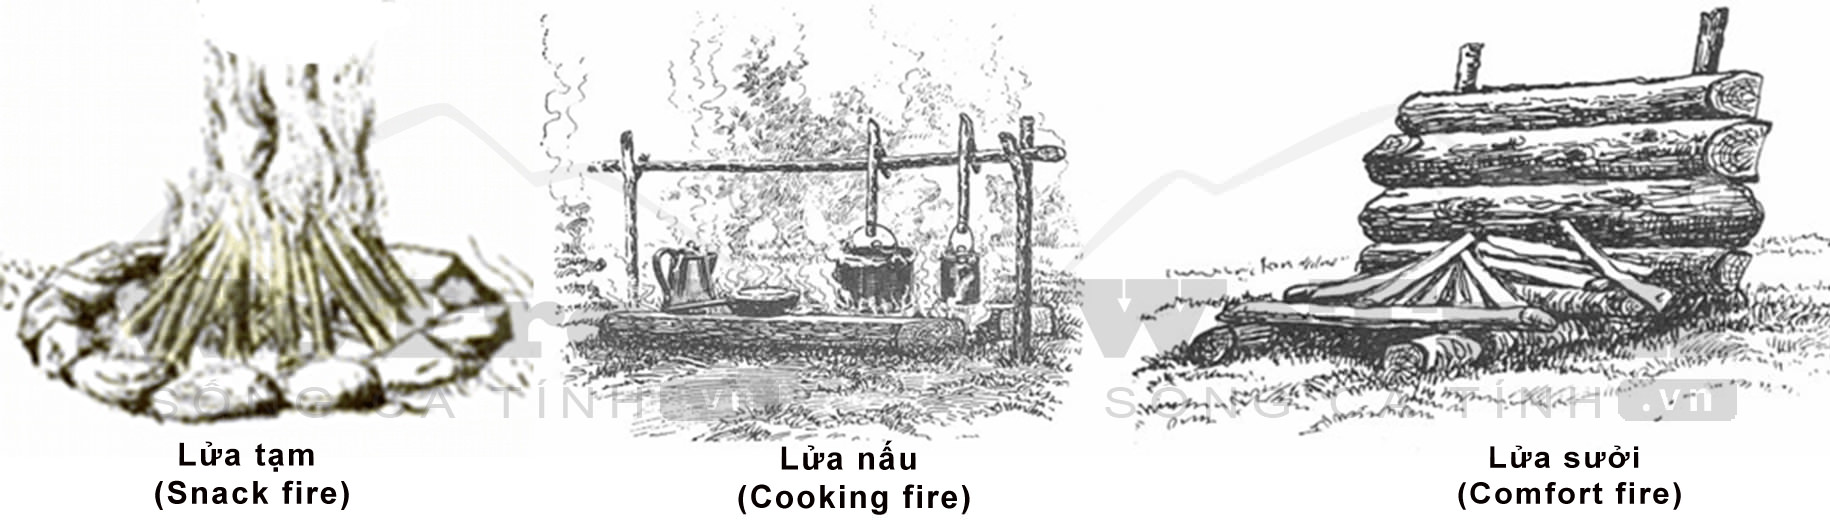 3-essential-campfires-snack-fire-cooking-fire-and-comfort-fire-wetrek_vn-2